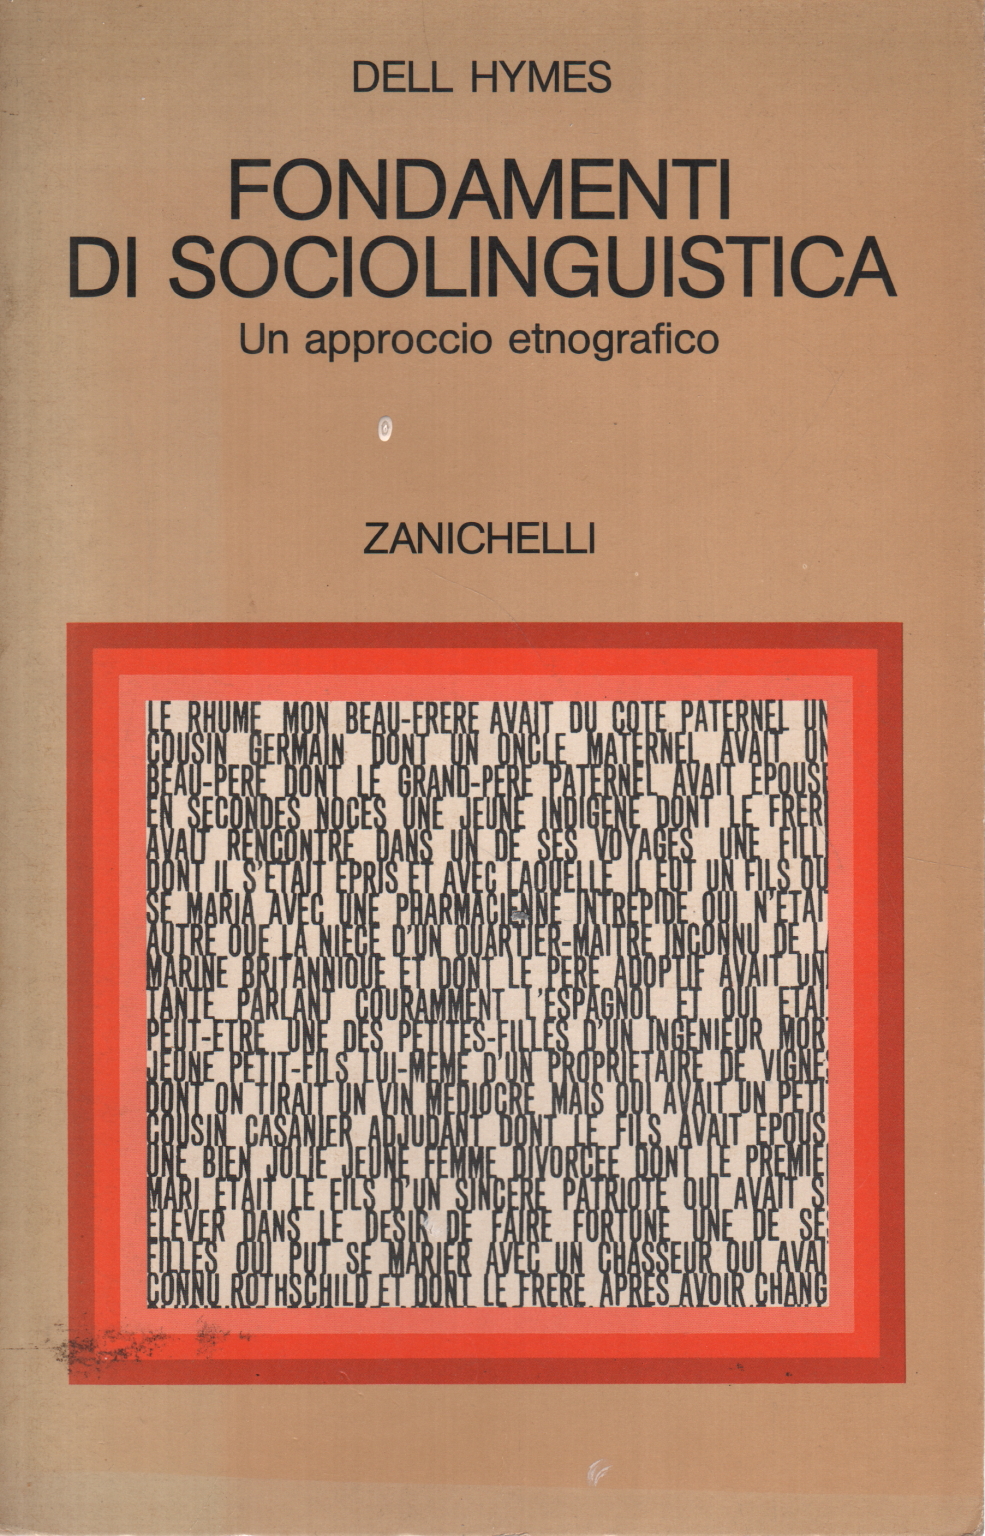 The foundations of sociolinguistics, Dell Hymes